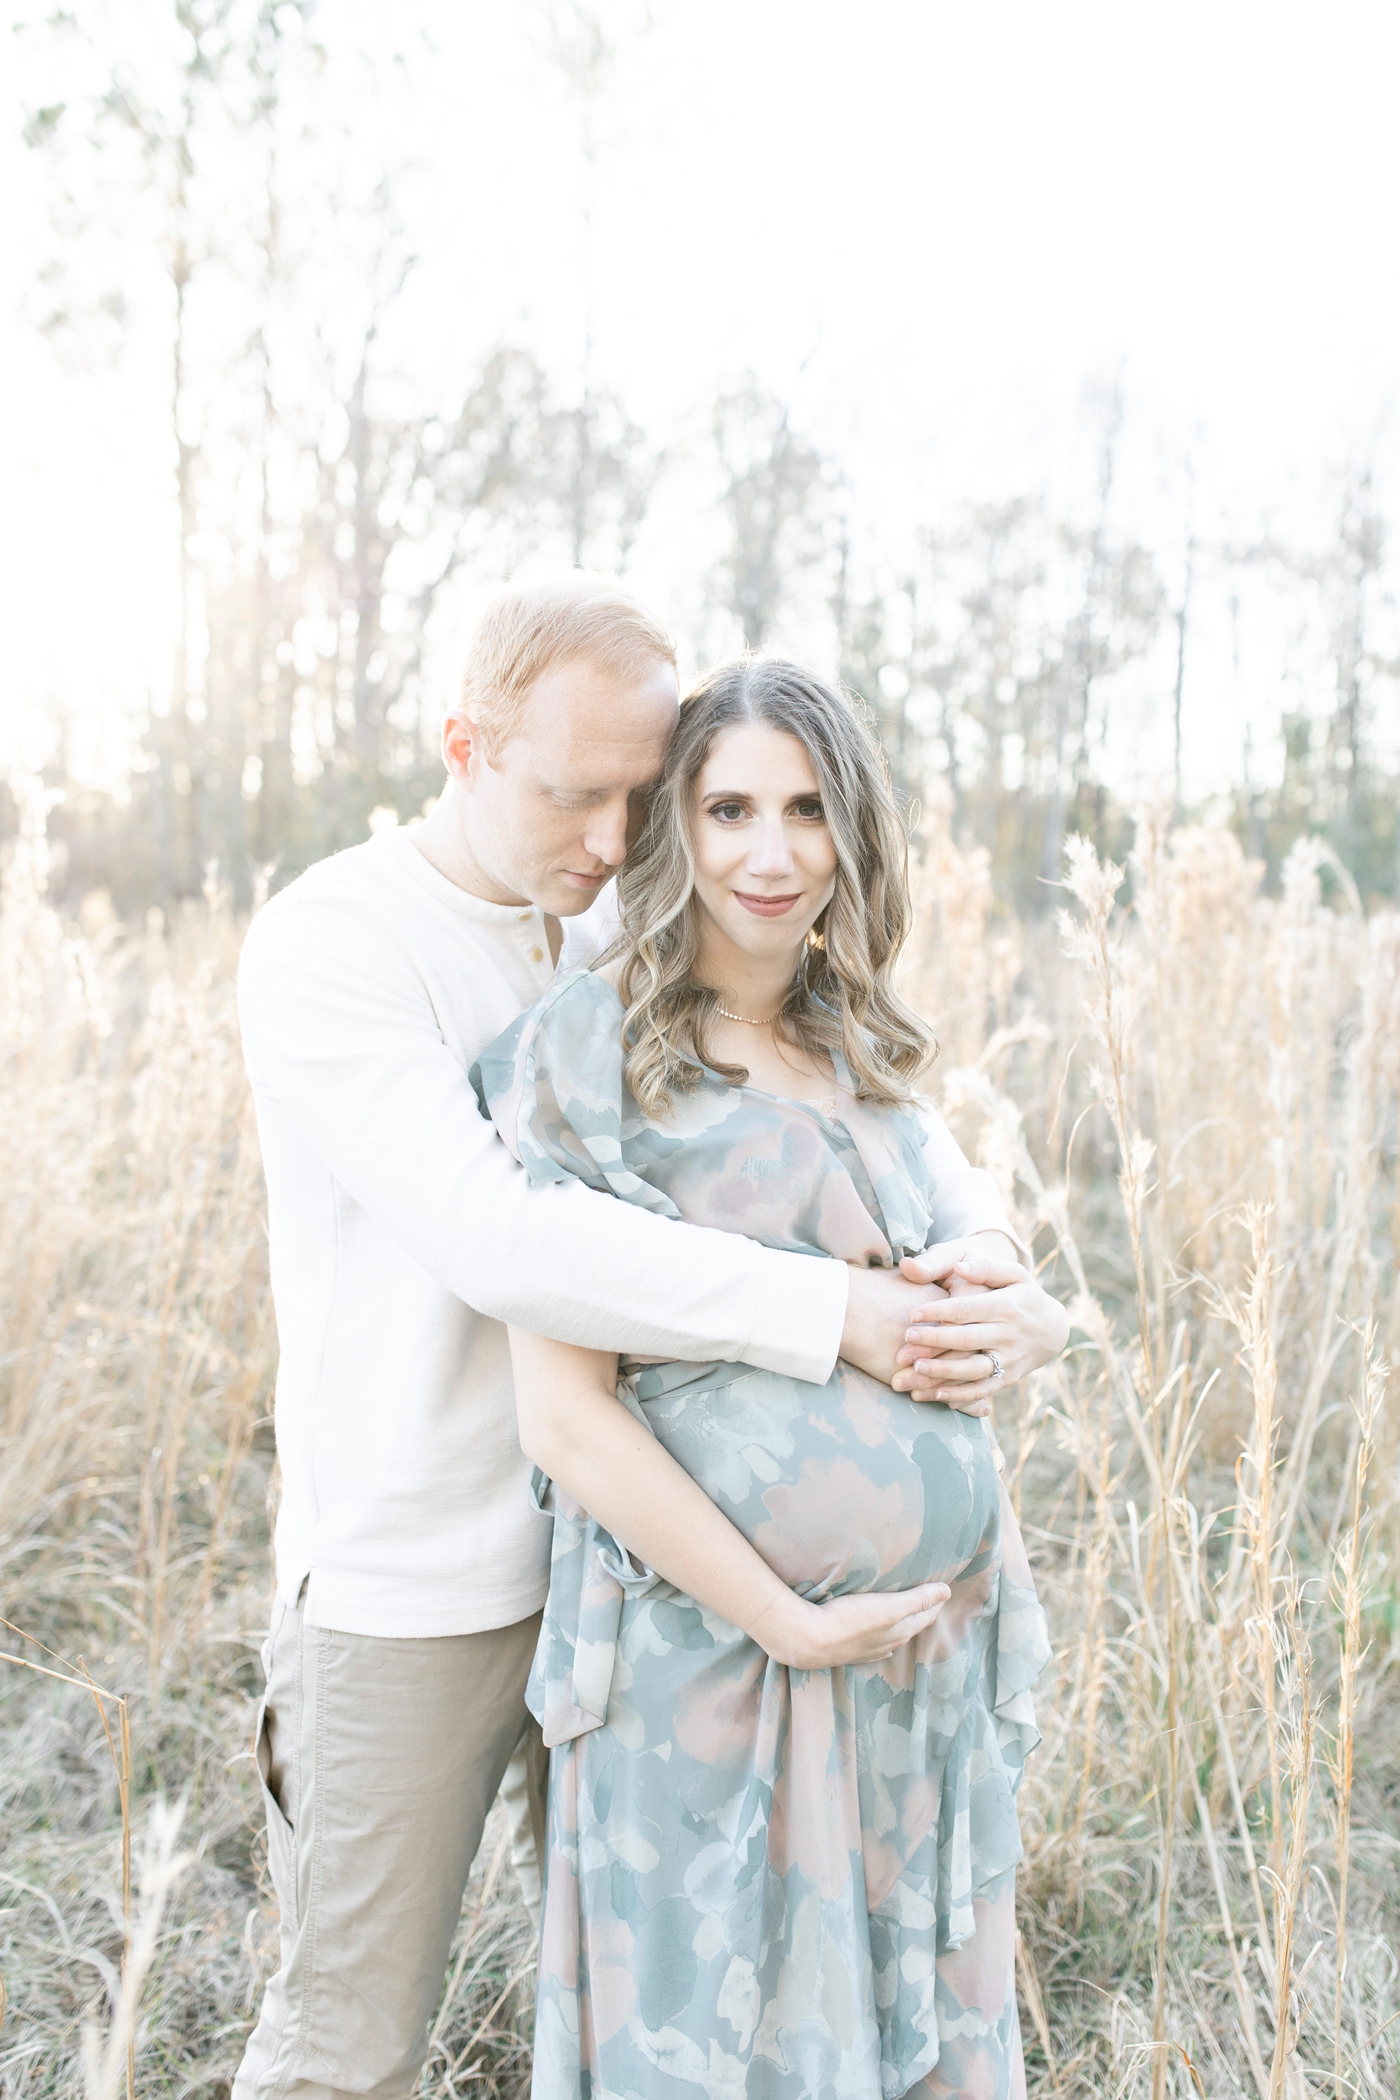 Sunset maternity session in tall golden grass. Photo by Little Sunshine Photography.